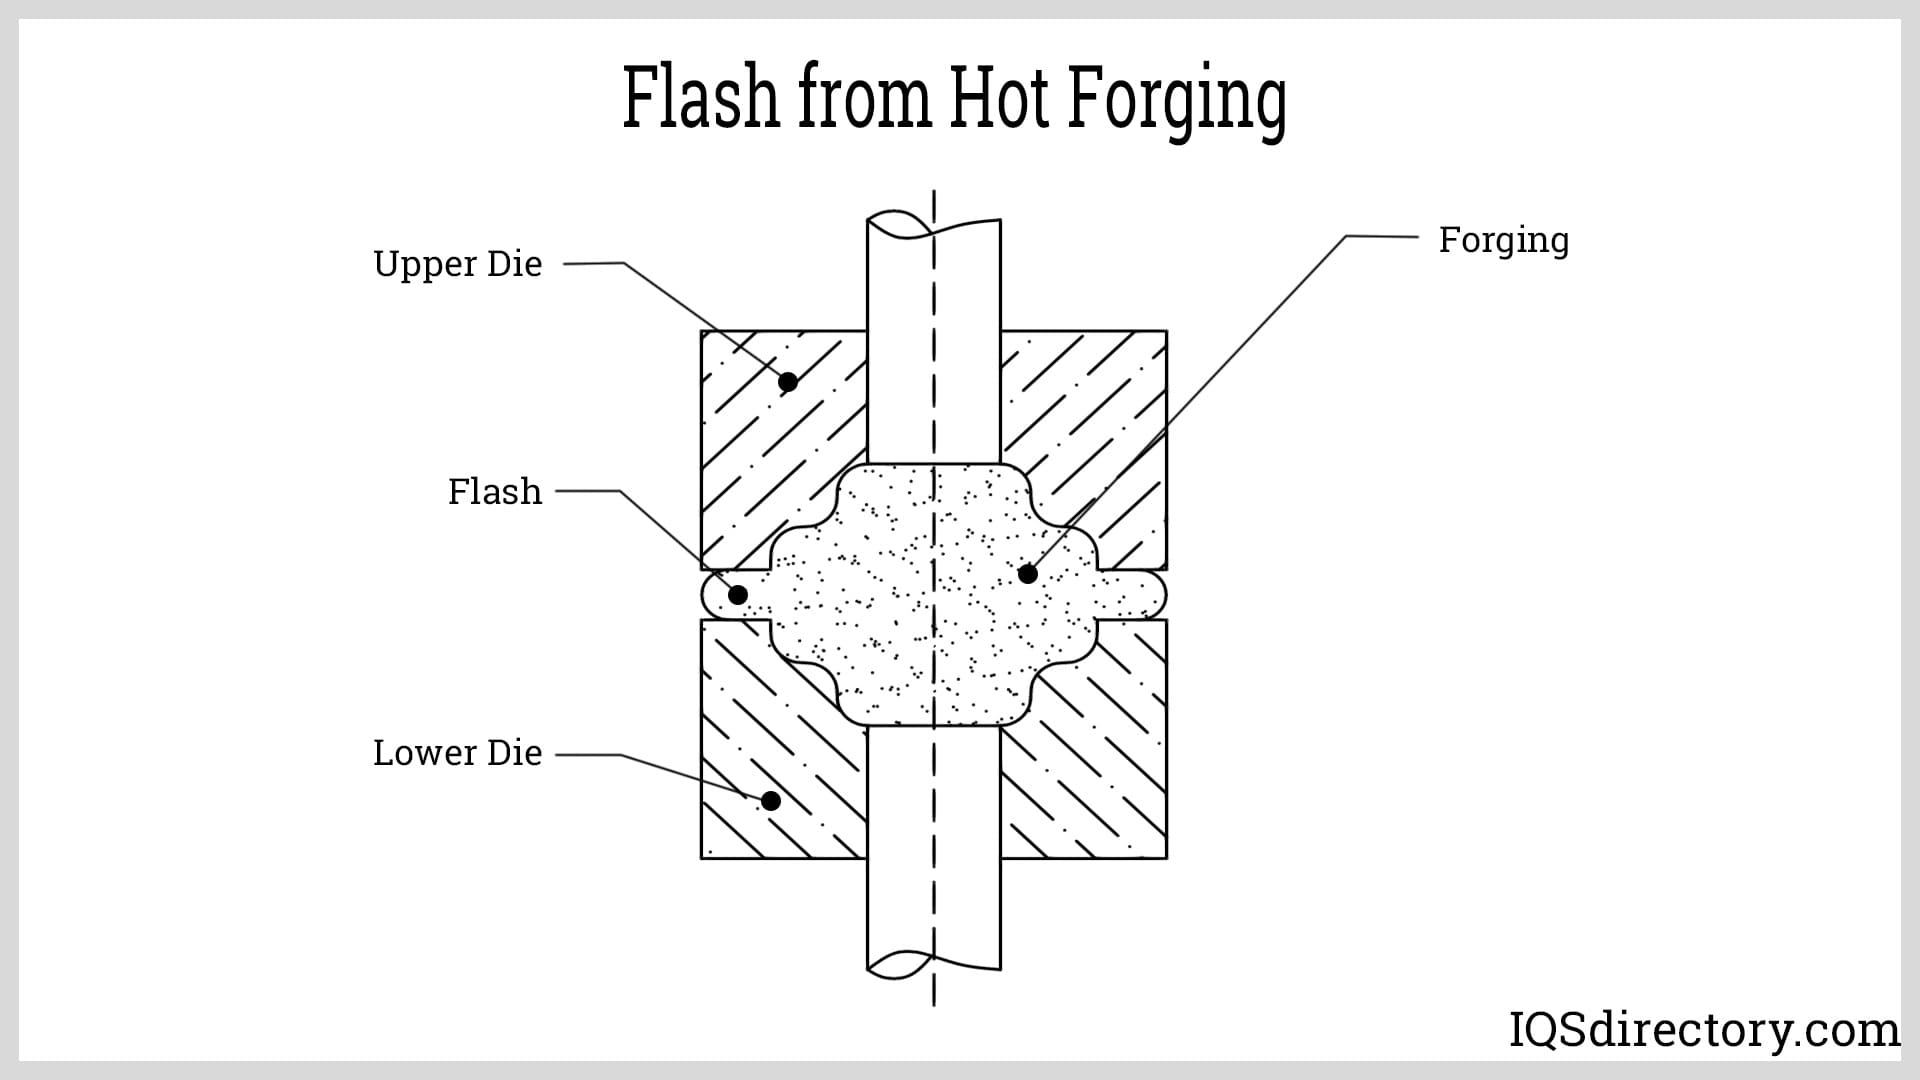 Flash from Hot Forging